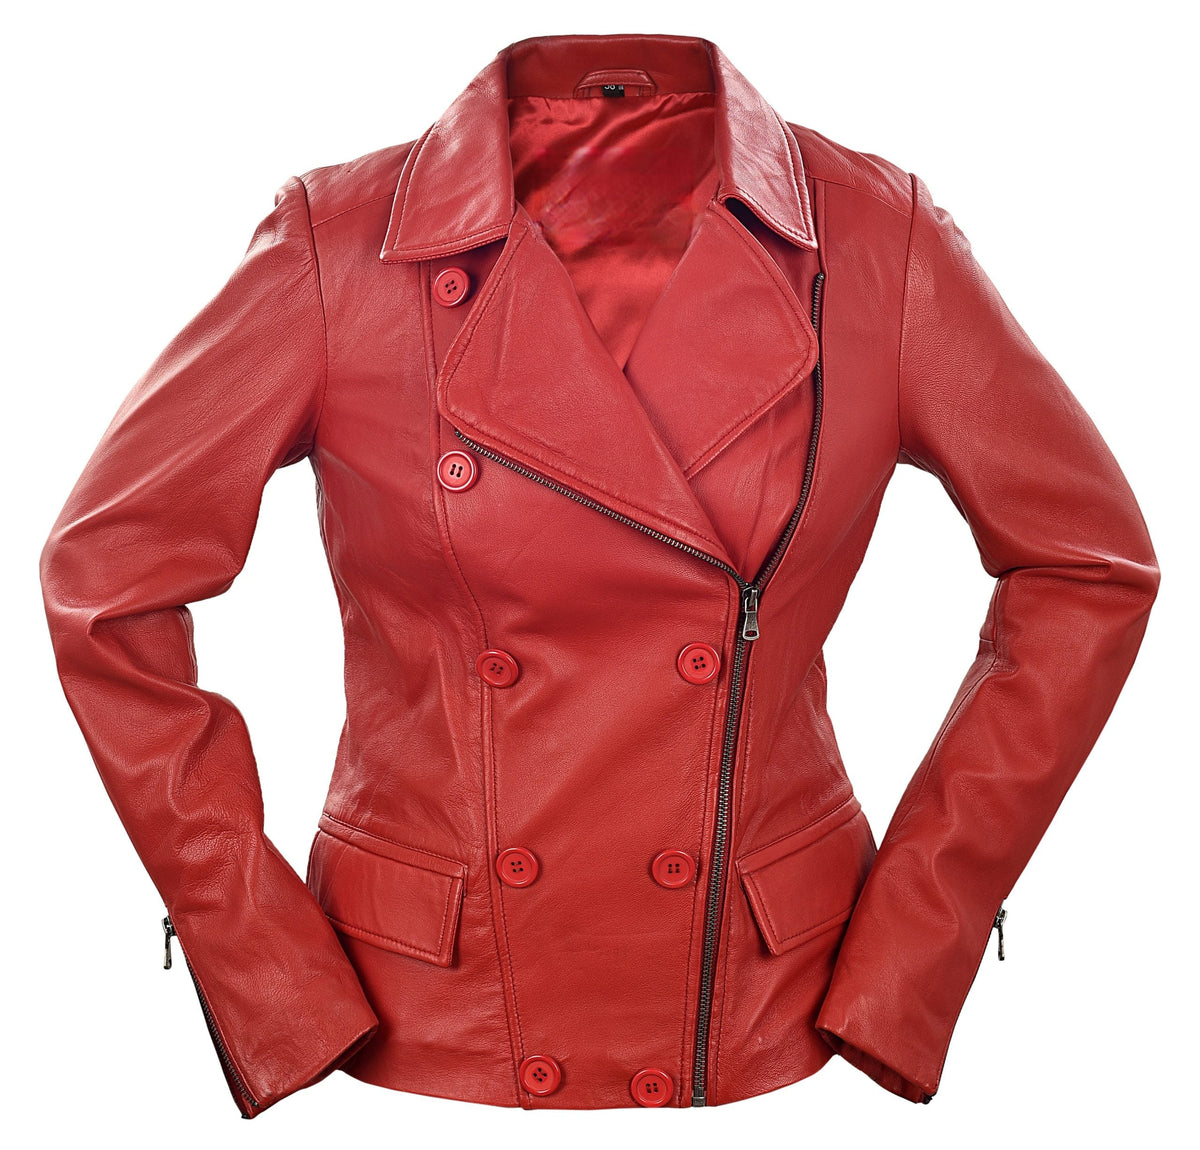 Womens Red Leather Biker Style Jacket